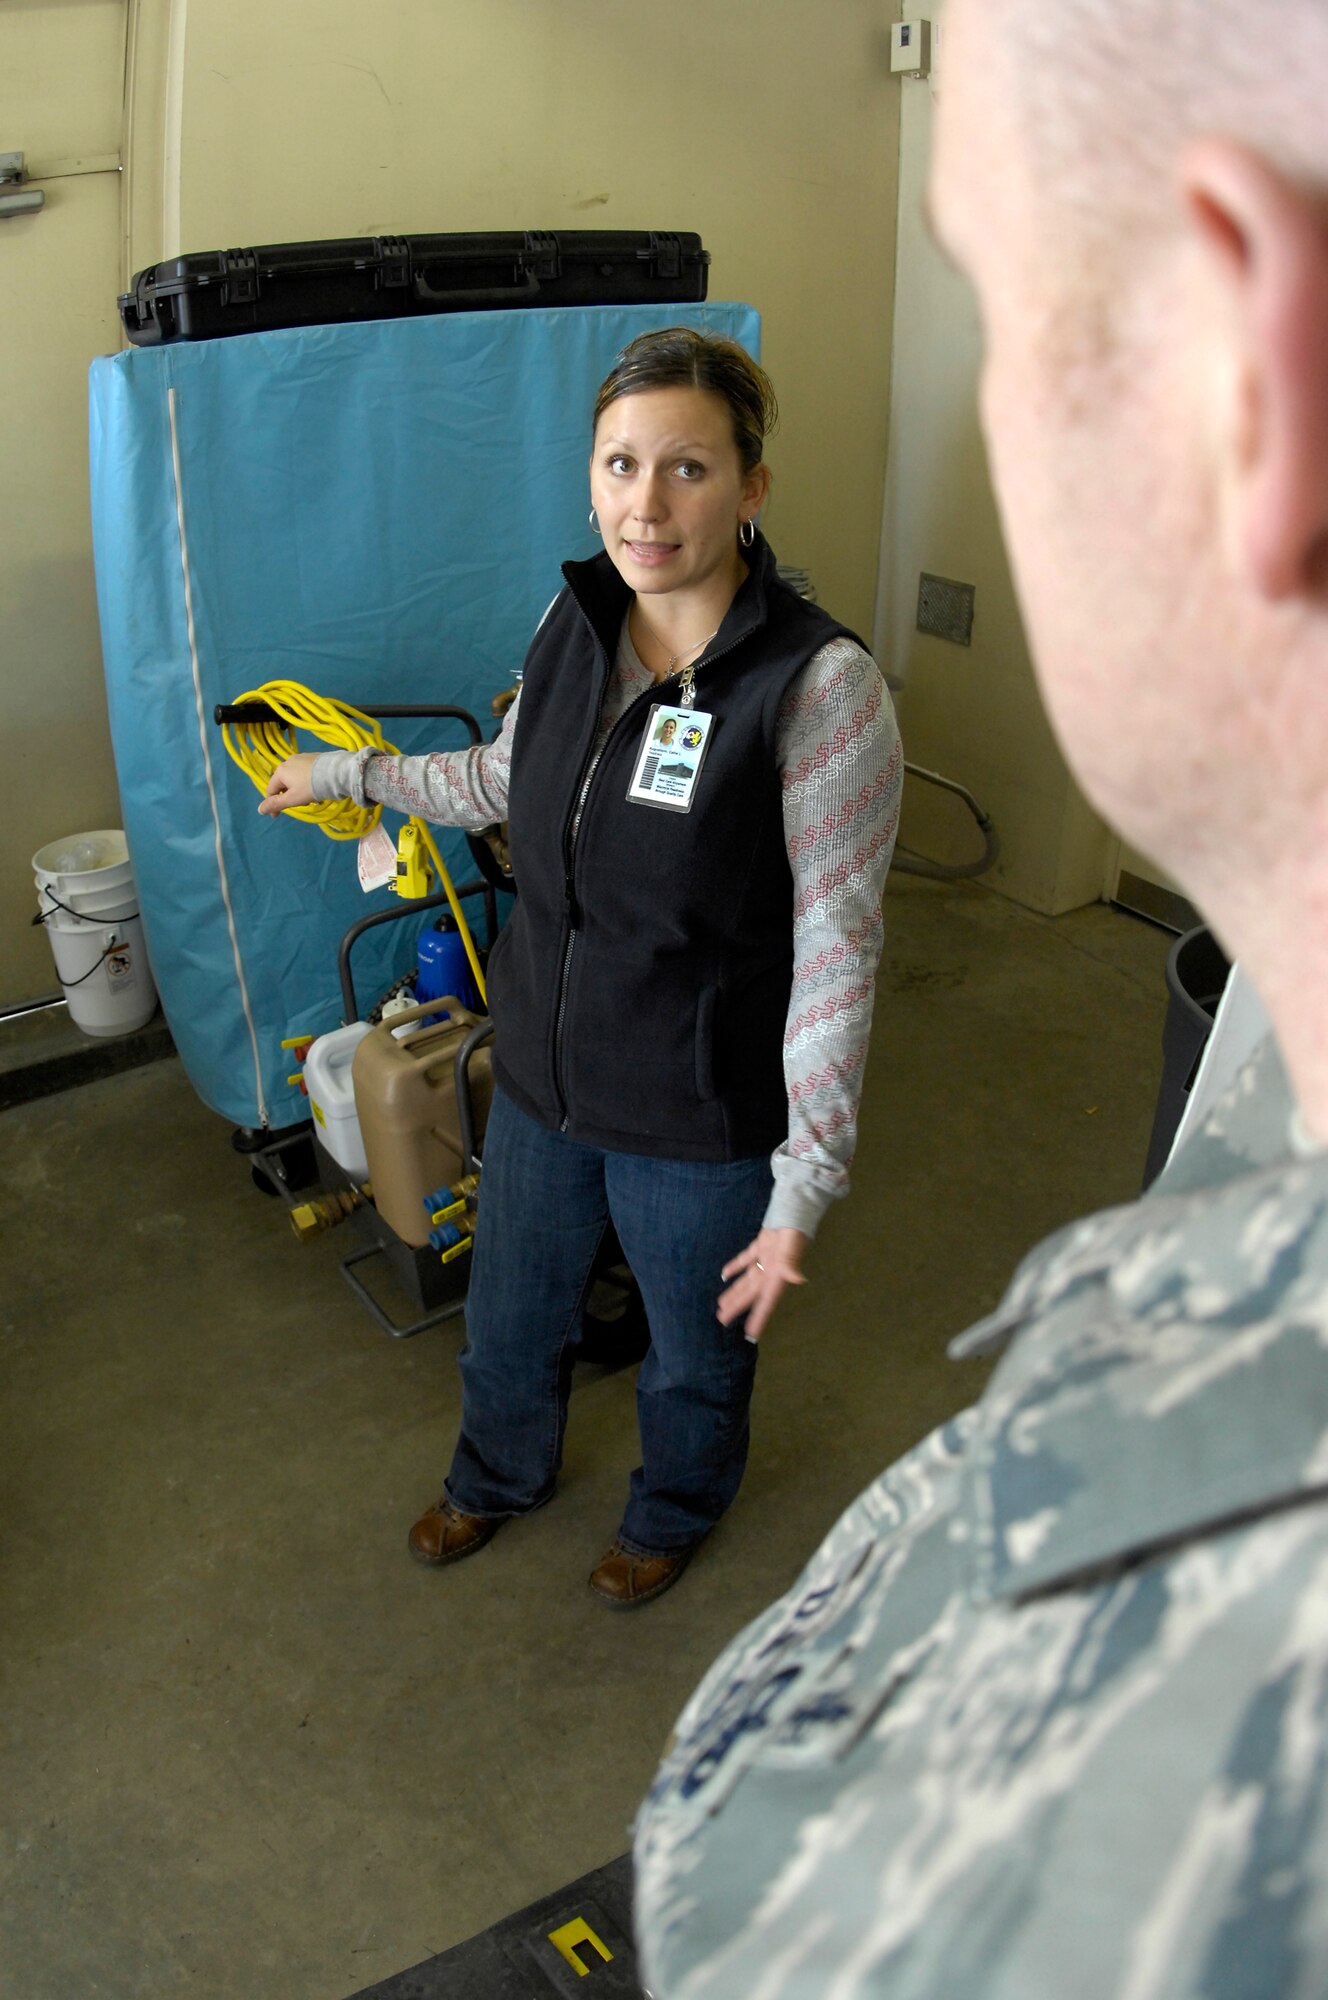 MINOT AIR FORCE BASE, N.D. -- Callie Augustson, 5th Medical Support Squadron medical readiness planner and analyst, refreshes Tech. Sgt. Keith Lewis, 5th Medical Operations Squadron aerospace and operational physiology noncommissioned officer-in-charge, on the basics of patient decontamination during a training exercise to ensure they are ready to ensure Minot Airmen are safe Nov. 5 here. The medical readiness flight ensures 5th Medical Group Airmen are ready to deploy in support of their countries interests around the world. The 5th MDG recently underwent a Health Services Inspection that covered 16 areas in four major categories. The group received an overall rating of excellent with eight of the graded areas receiving an outstanding, the highest rating possible. (U.S. Air Force photo by Airman 1st Class Benjamin Stratton)